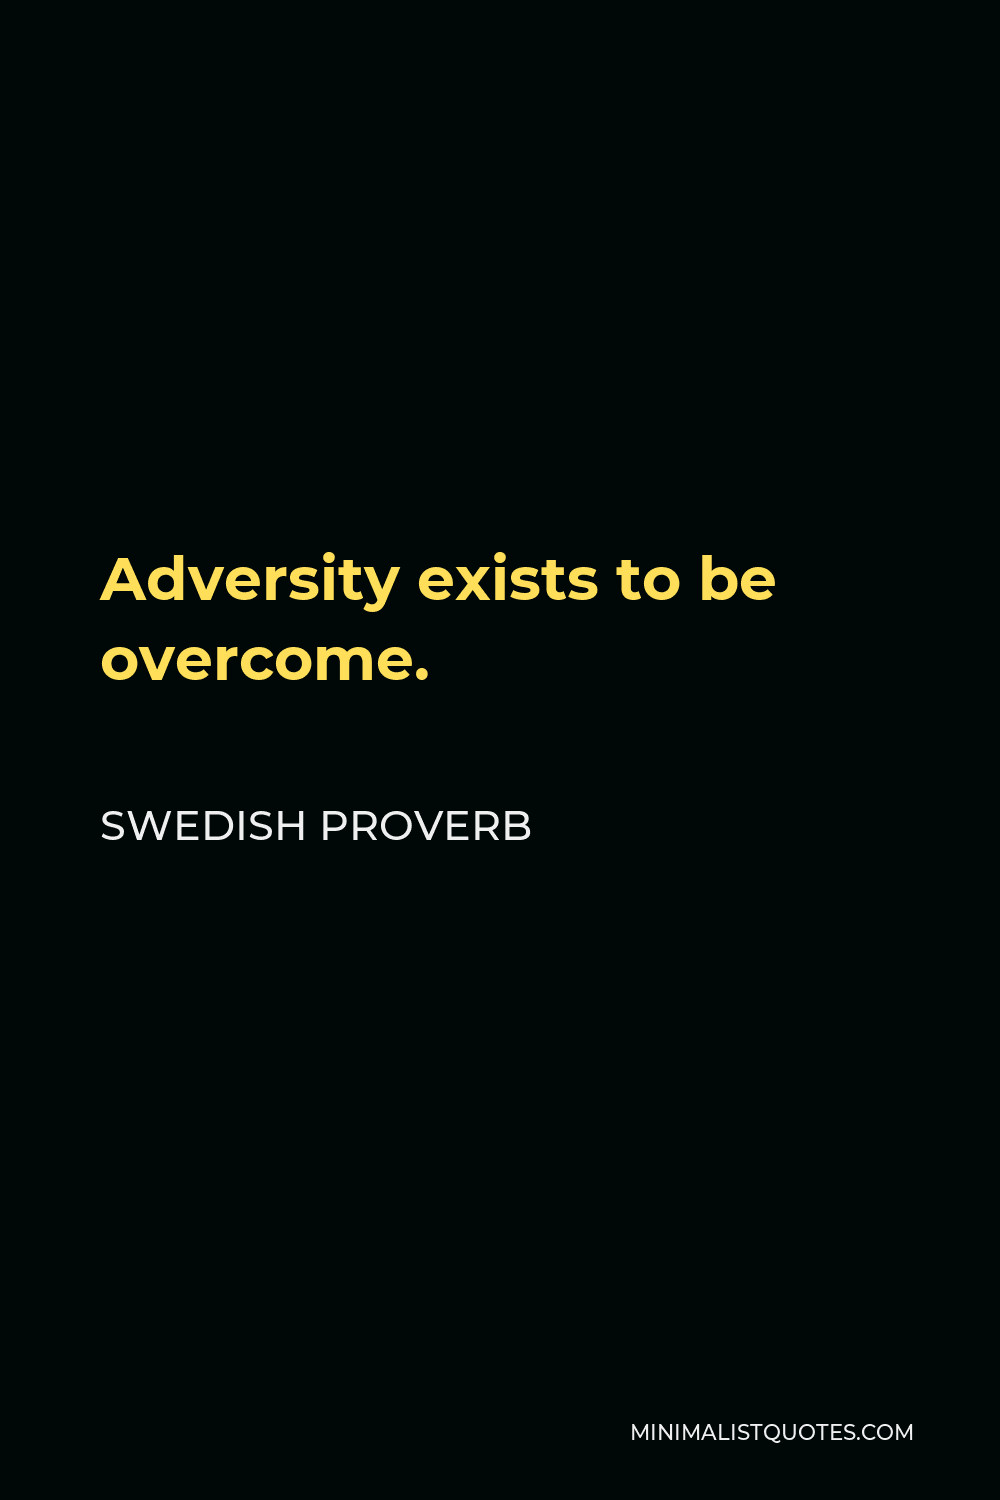 Swedish Proverb Quote - Adversity exists to be overcome.